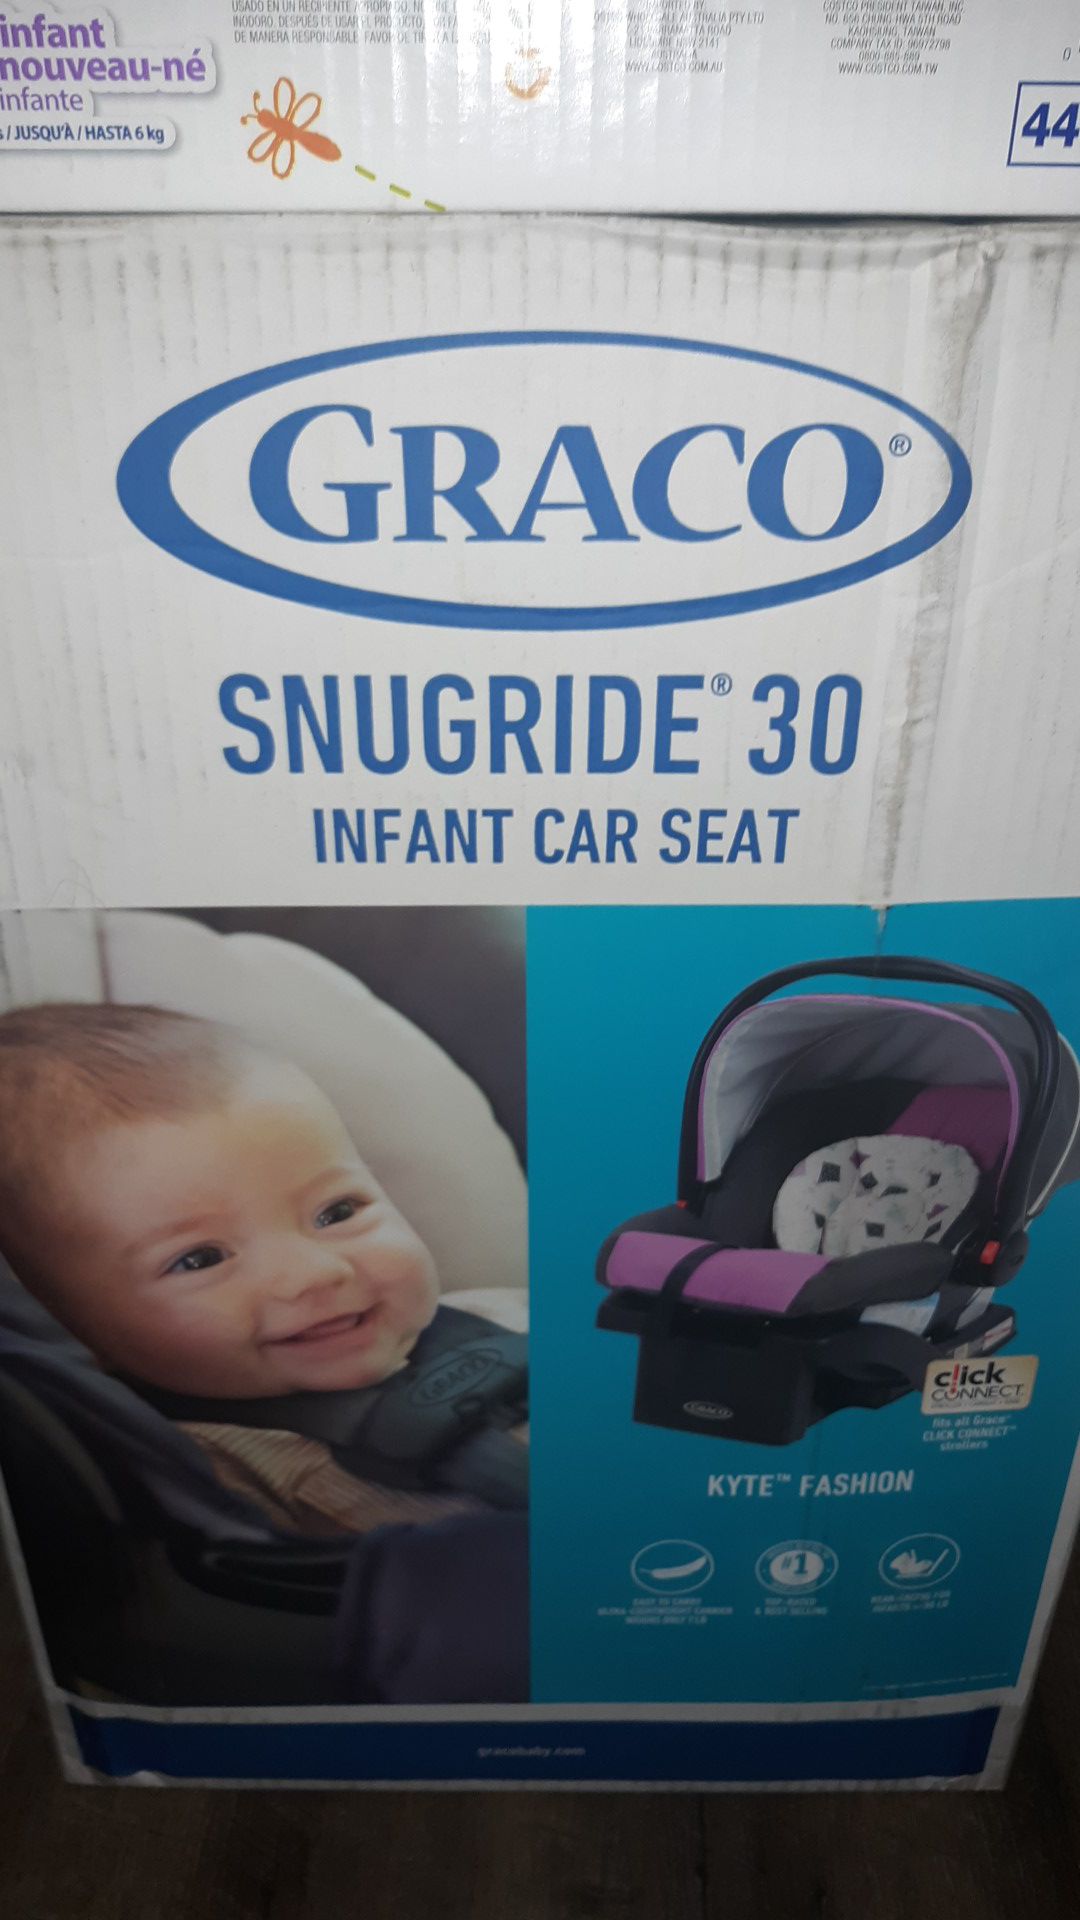 Graco INFANT CAR SEAT BRAND NEW!!